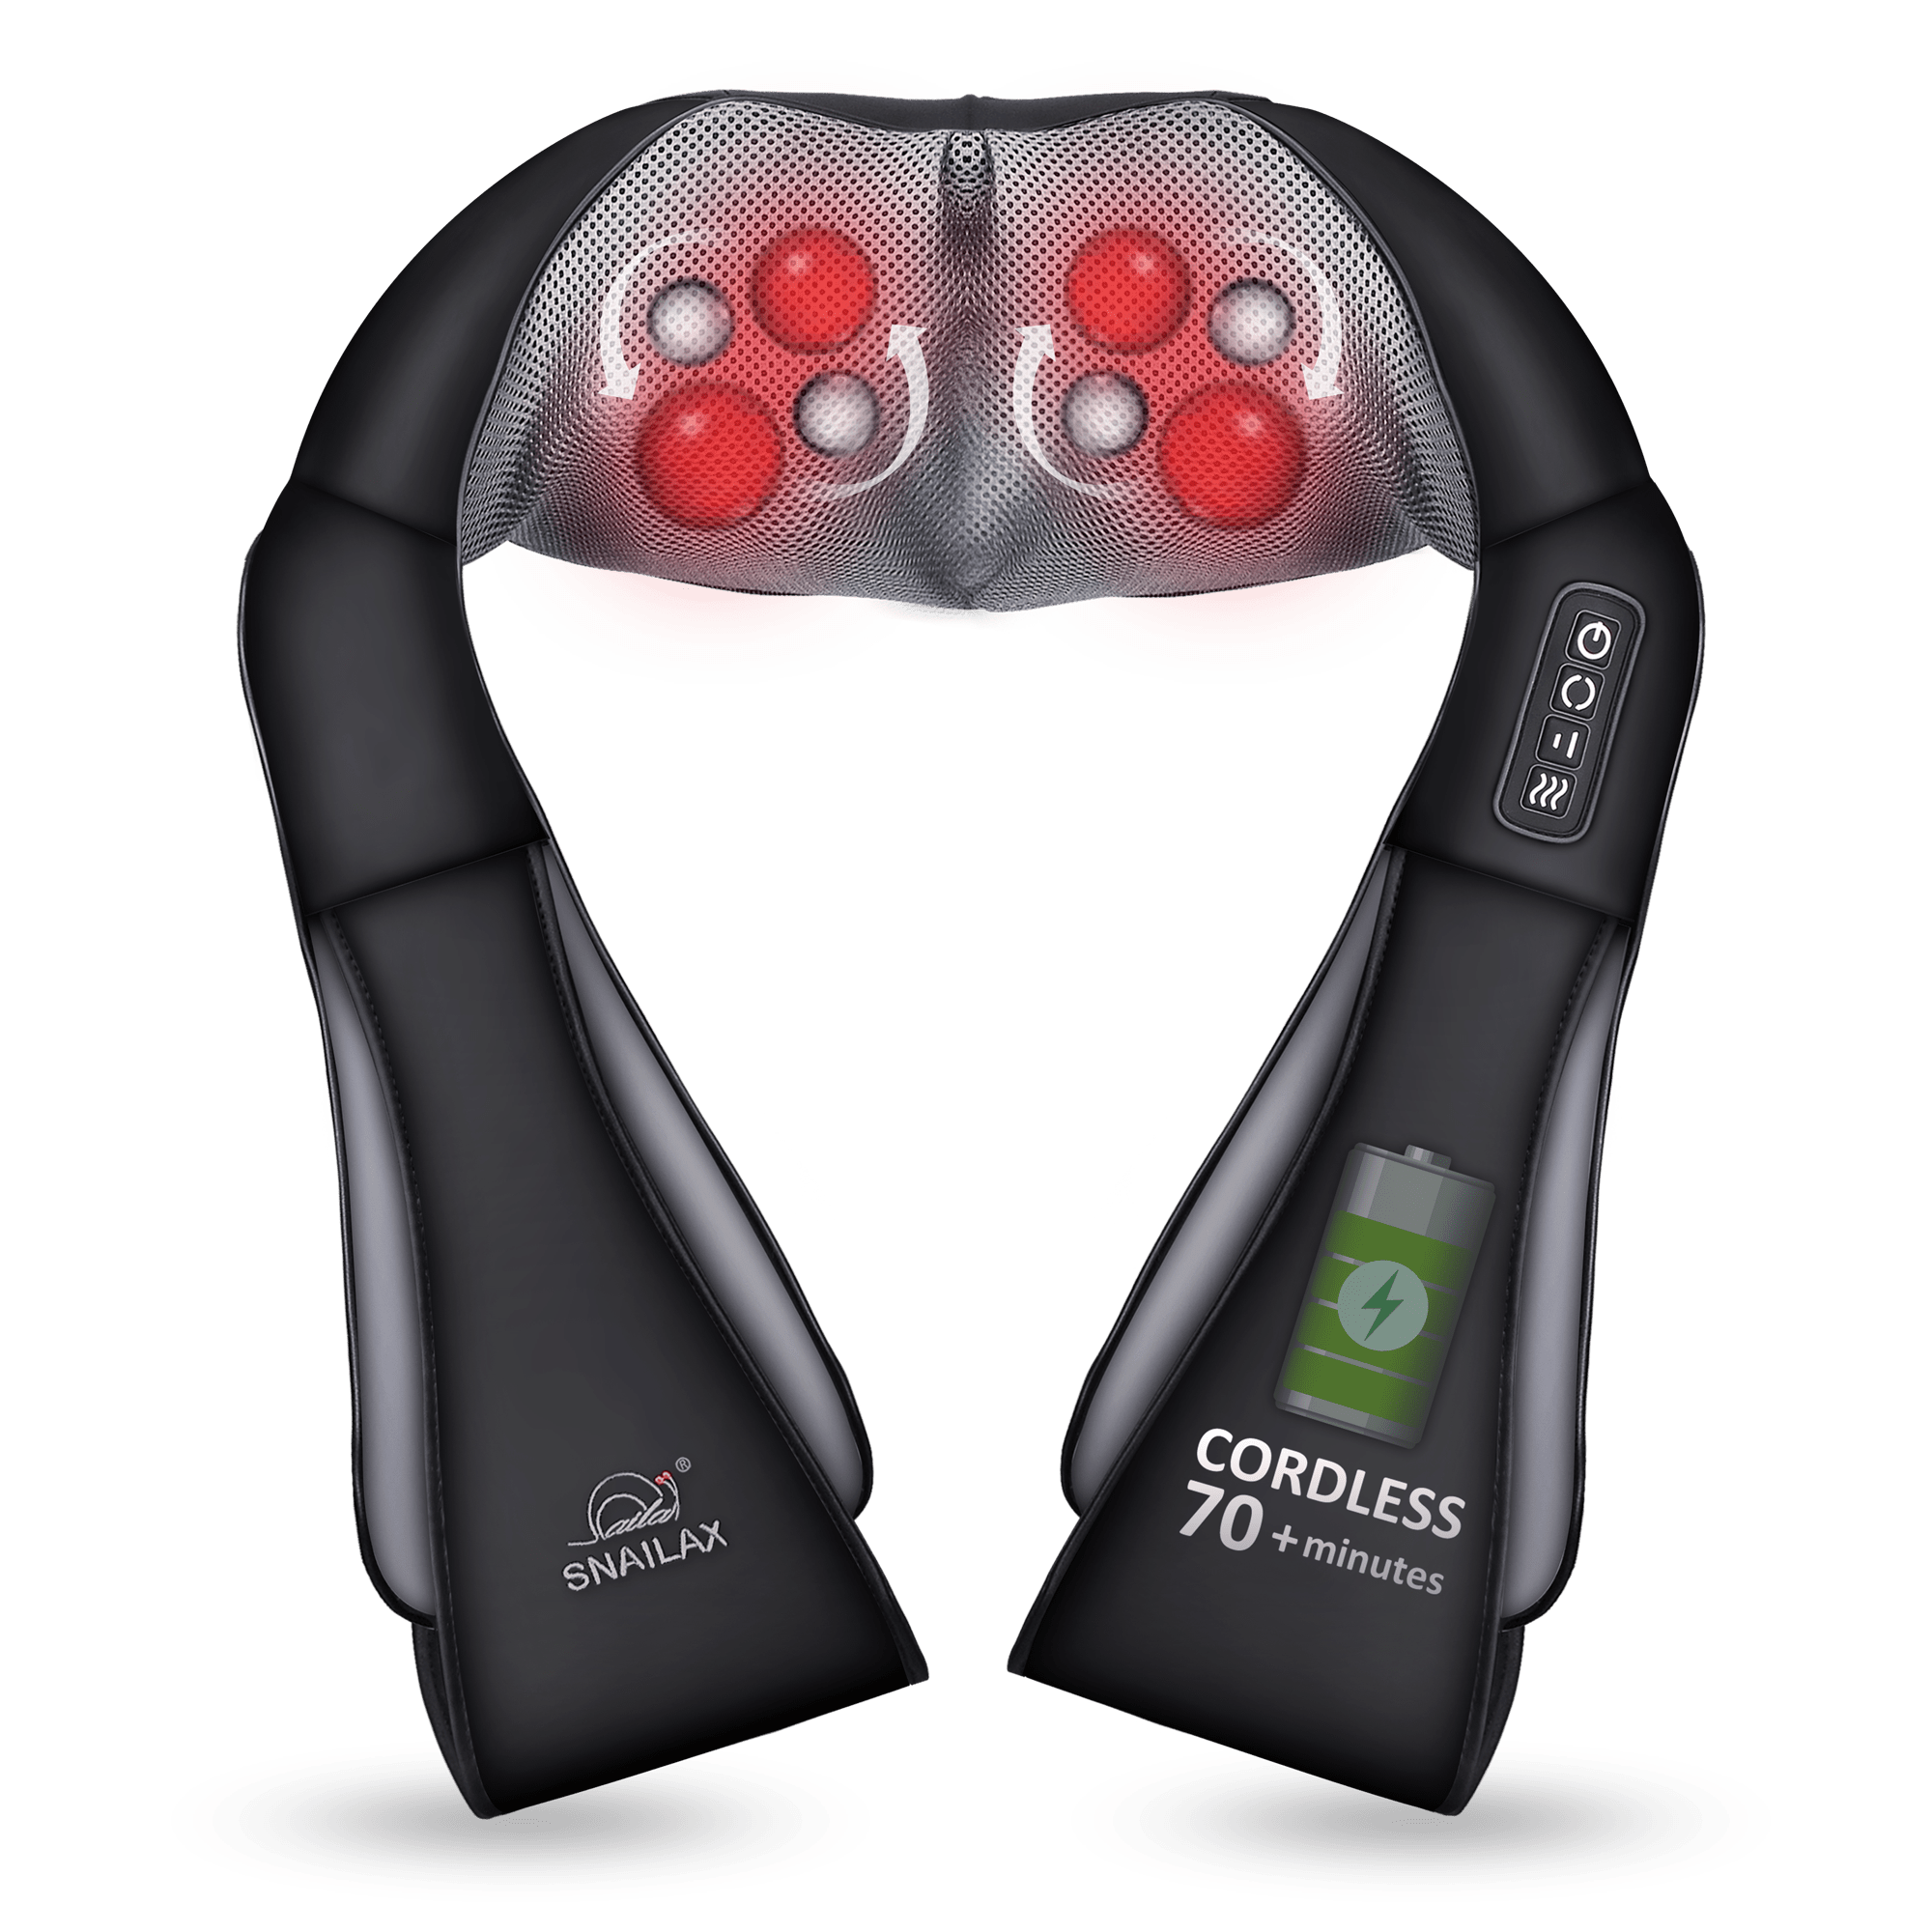 Rechargeable Smart Electric Neck and Shoulder Massager Portable